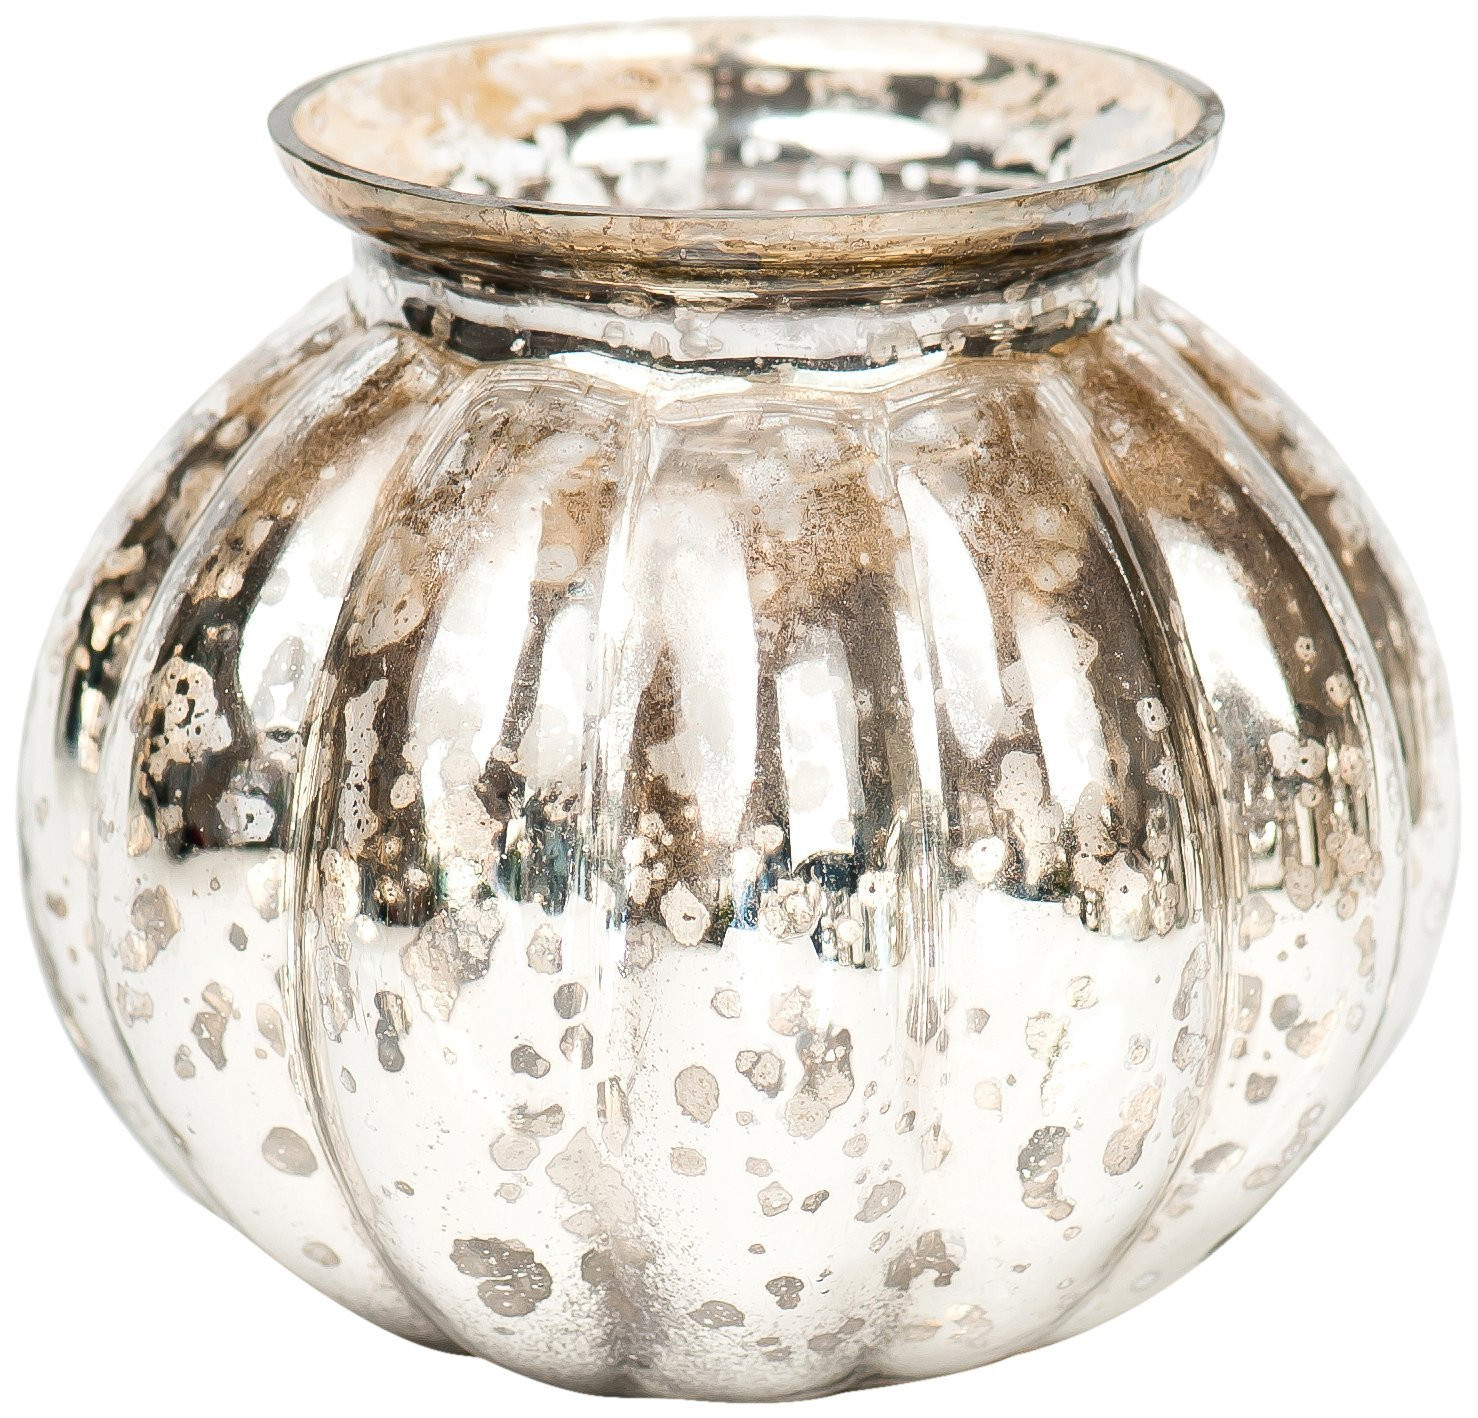 12 attractive Round Vases wholesale 2024 free download round vases wholesale of mercury glass pendant light elegant mercury table lamp lovely gold within mercury glass pendant light fresh insideretail mercury glass mini round vase silver 13 cm s